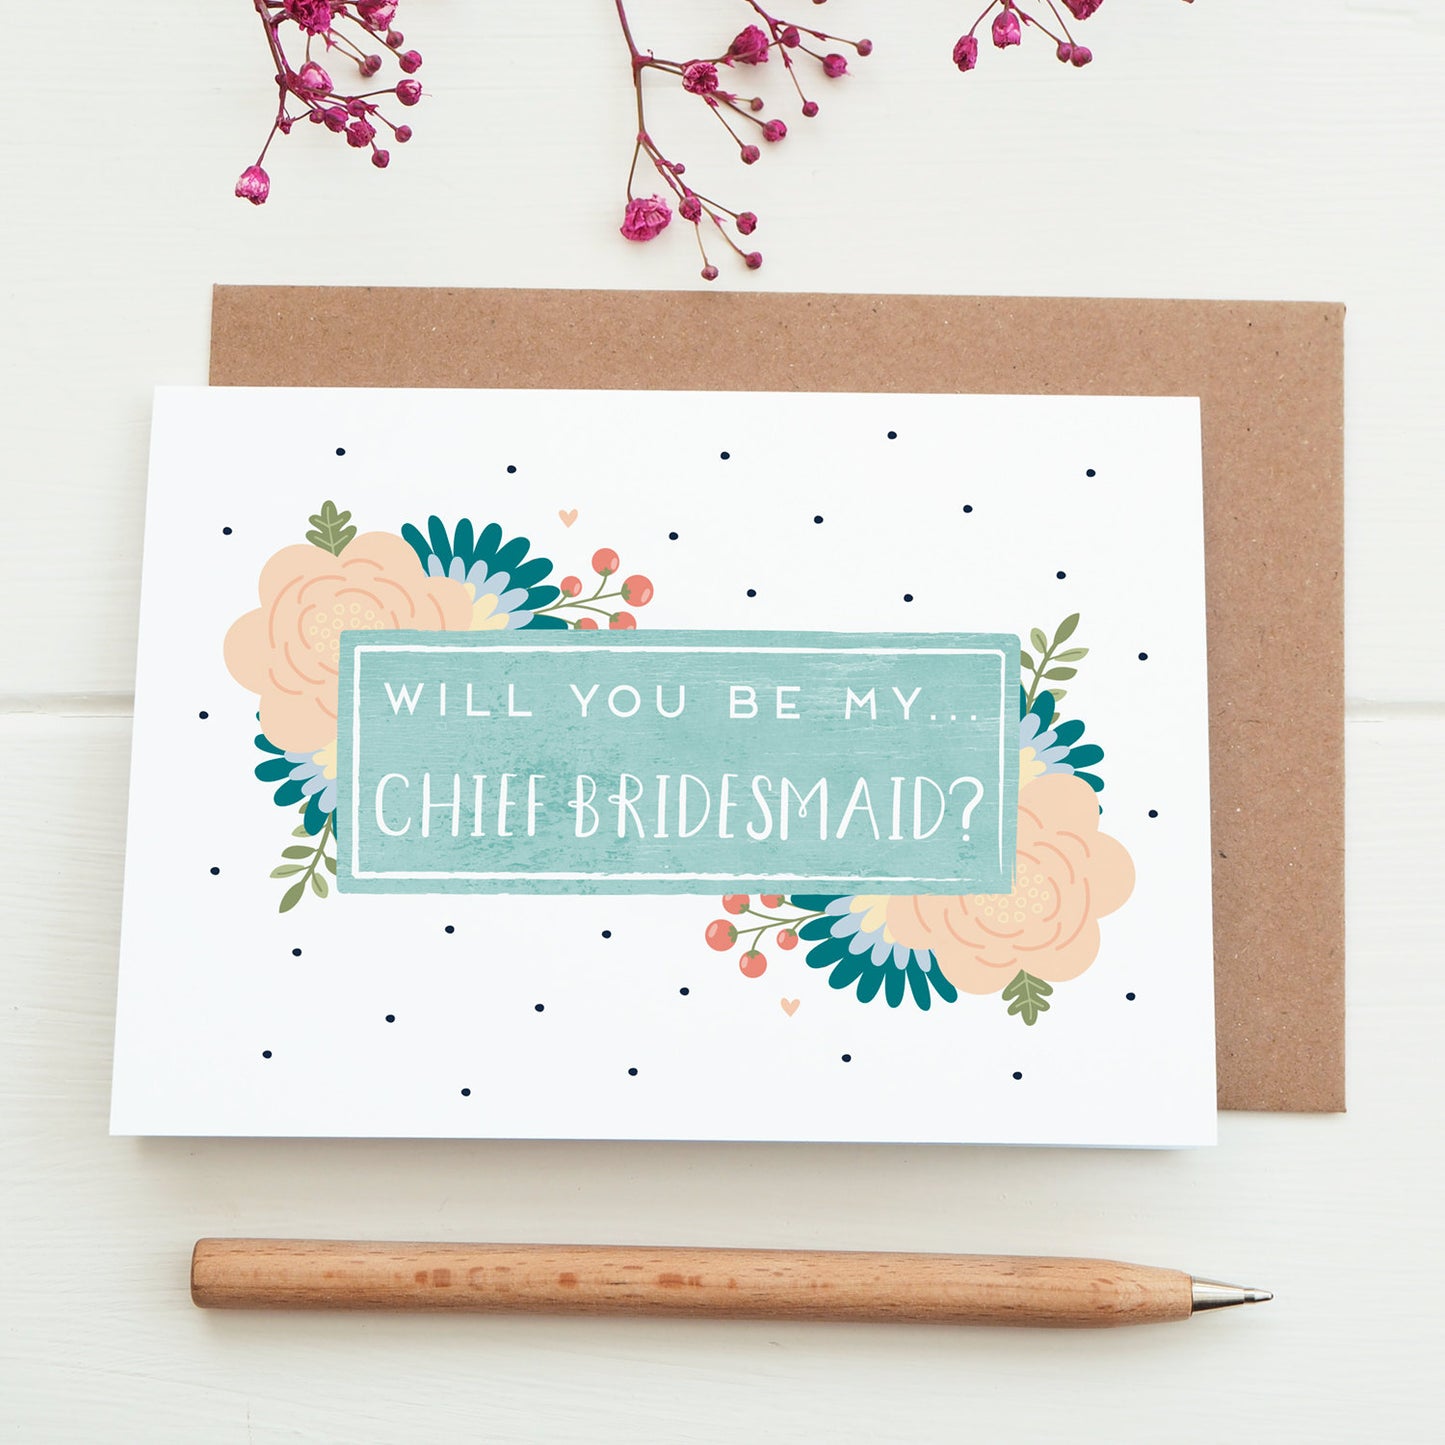 Will you be my chief bridesmaid card in blue